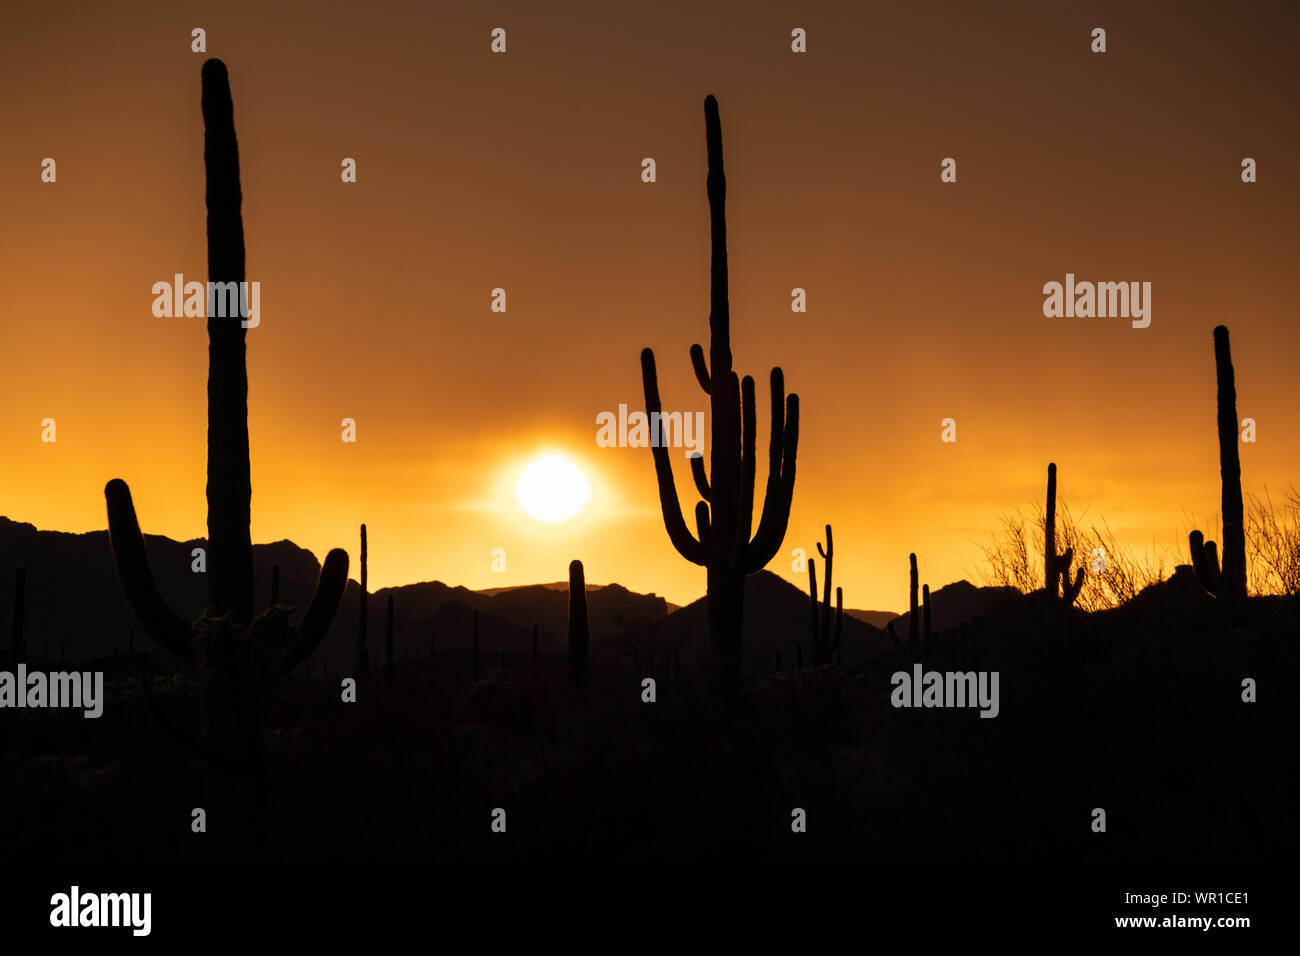 A bright orange sunset silhouettes saguaro cactus after a strong thunderstorm in Organ Pipe Cactus National Monument, Pima County, Arizona, USA Stock Photo